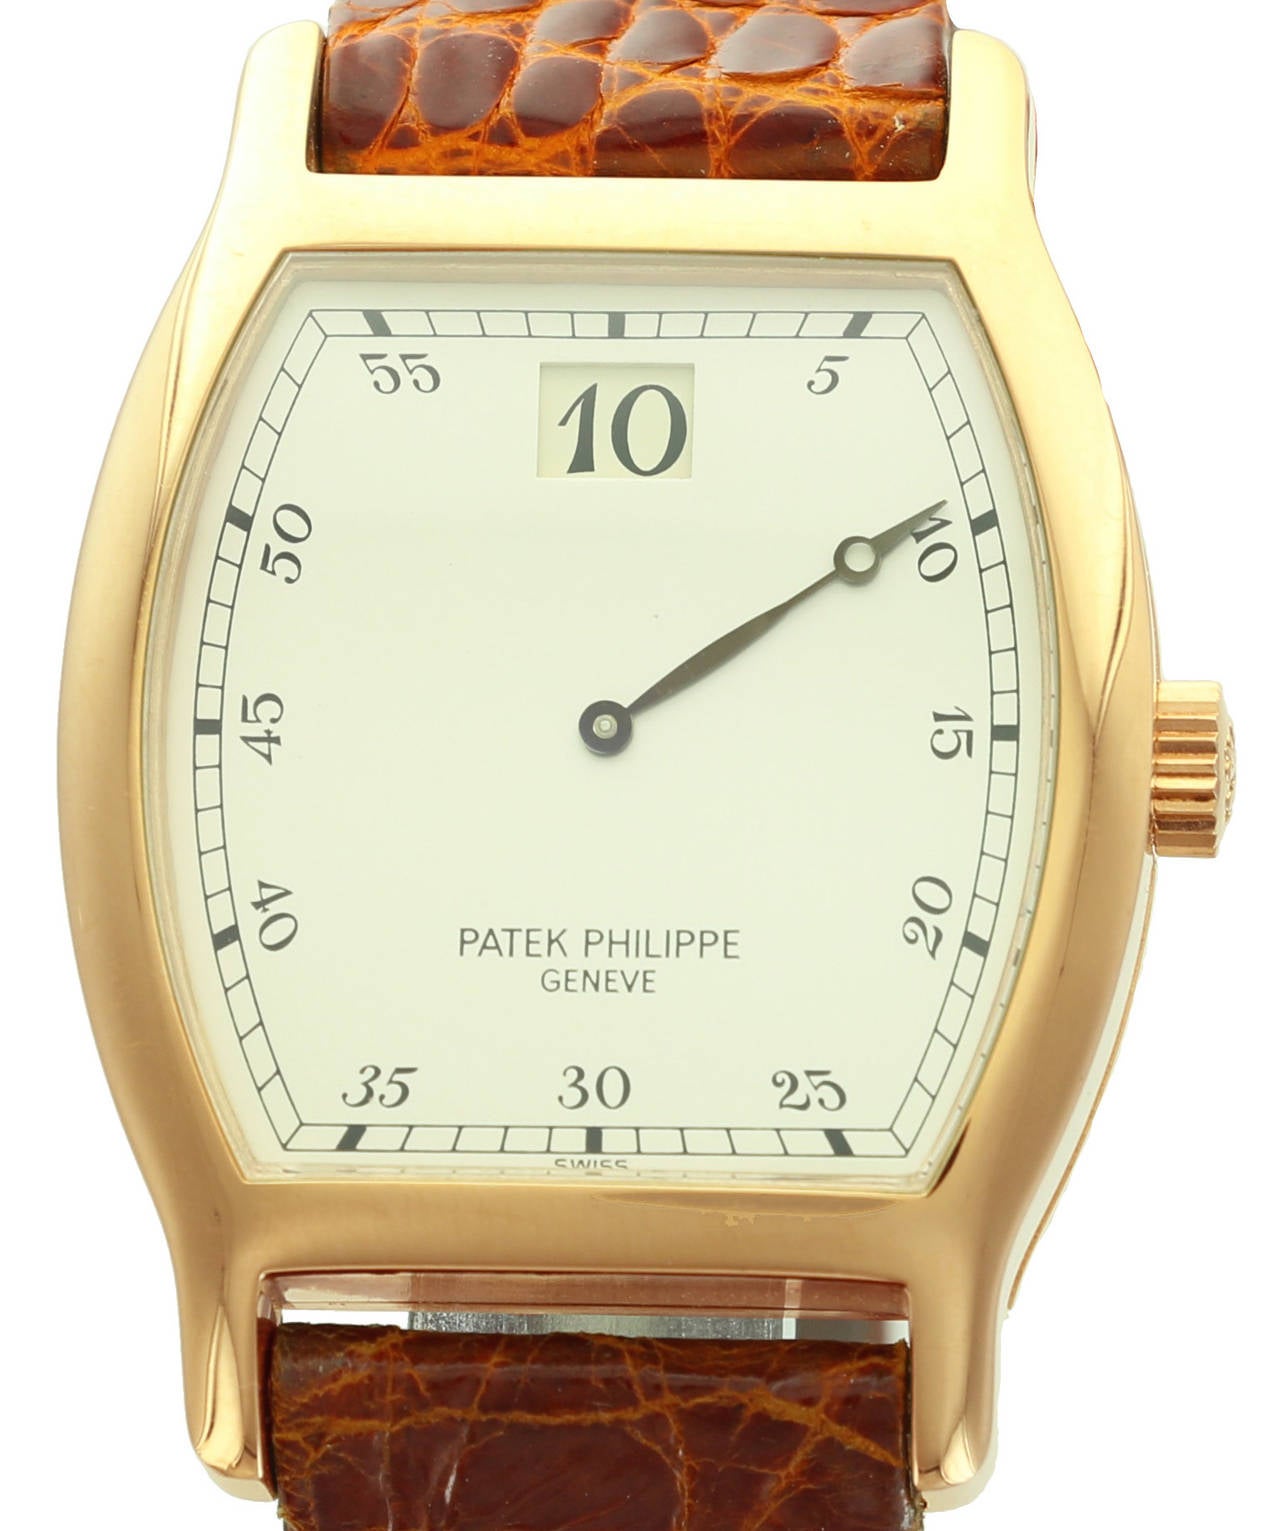 This beautiful, rose gold Patek Philippe Jumping Hour, ref. 3969R has an interesting feature rarely seen in watches; the jumping hour. At the top of the dial, there is a number wheel many would confuse as a date wheel. Instead, this wheel displays